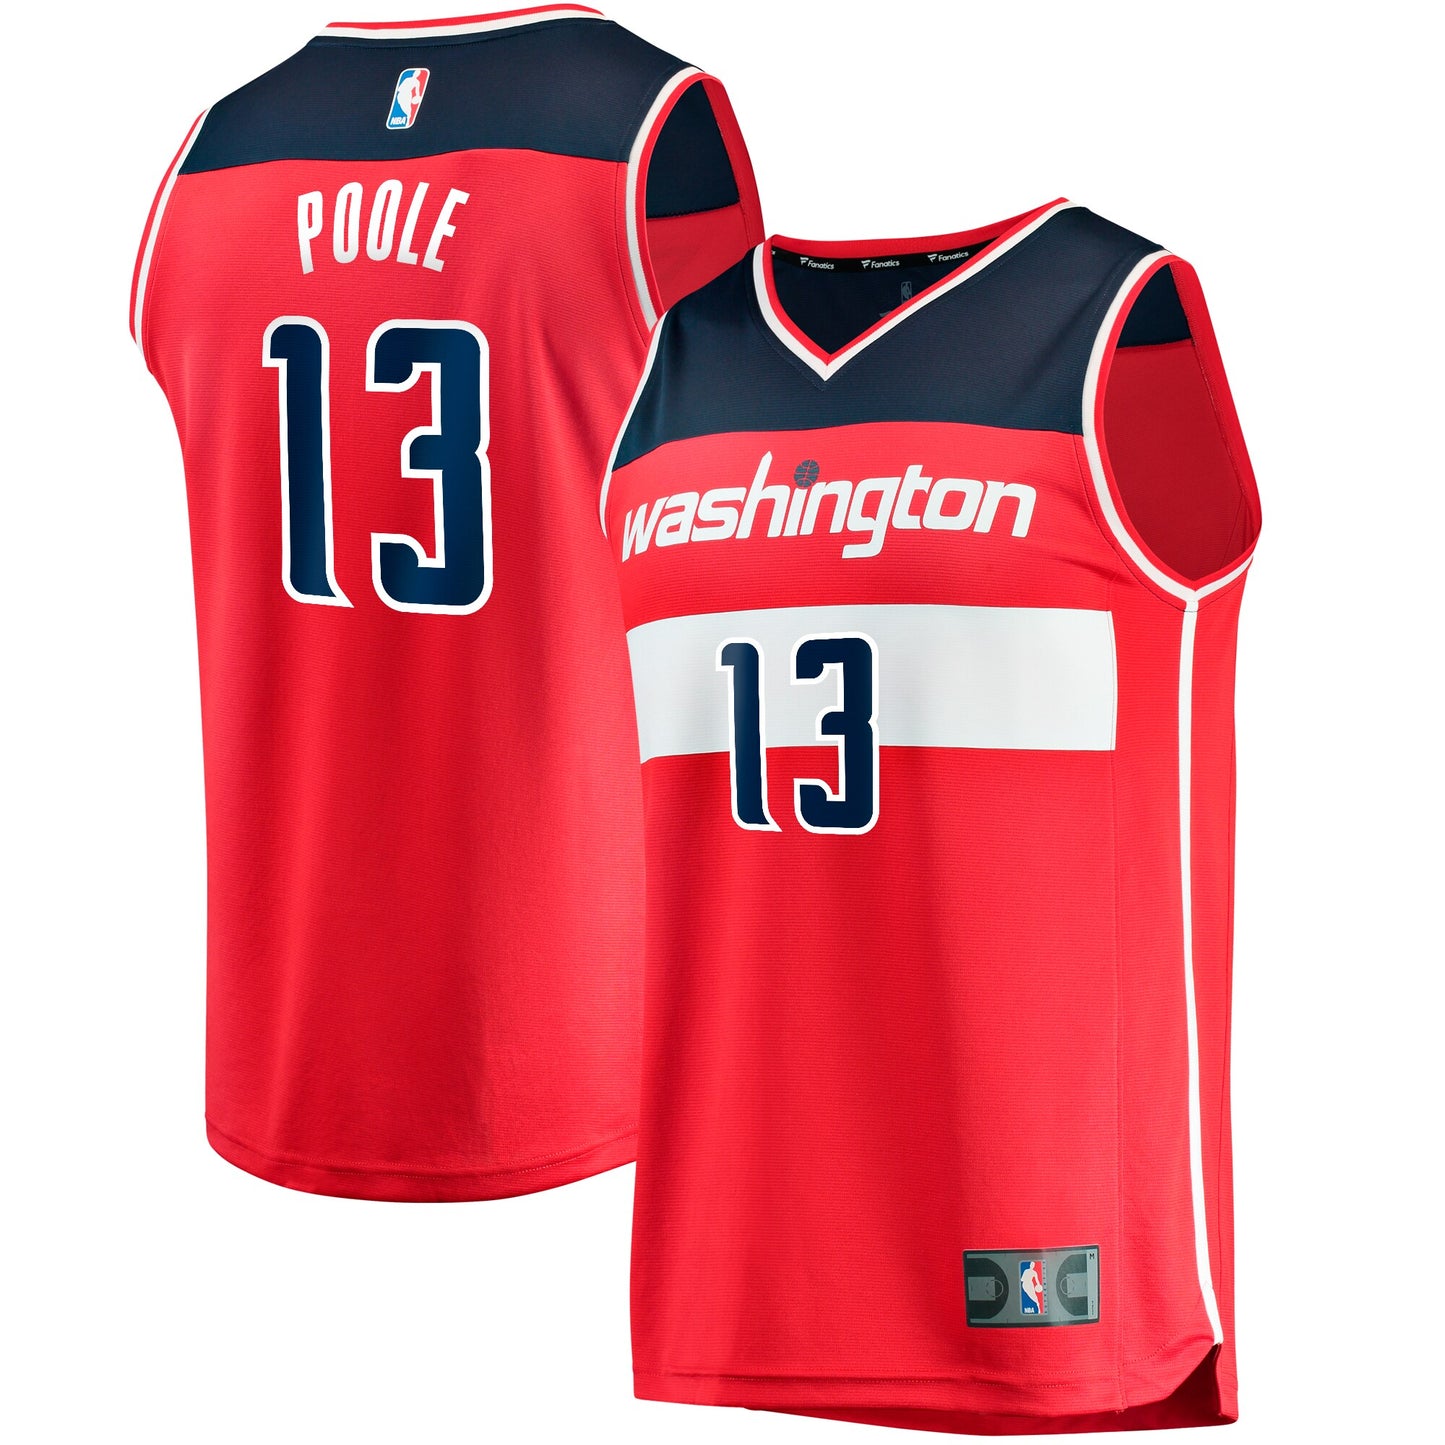 Jordans Poole Washington Wizards Fanatics Branded Youth Fast Break Player Jersey - Icon Edition - Red